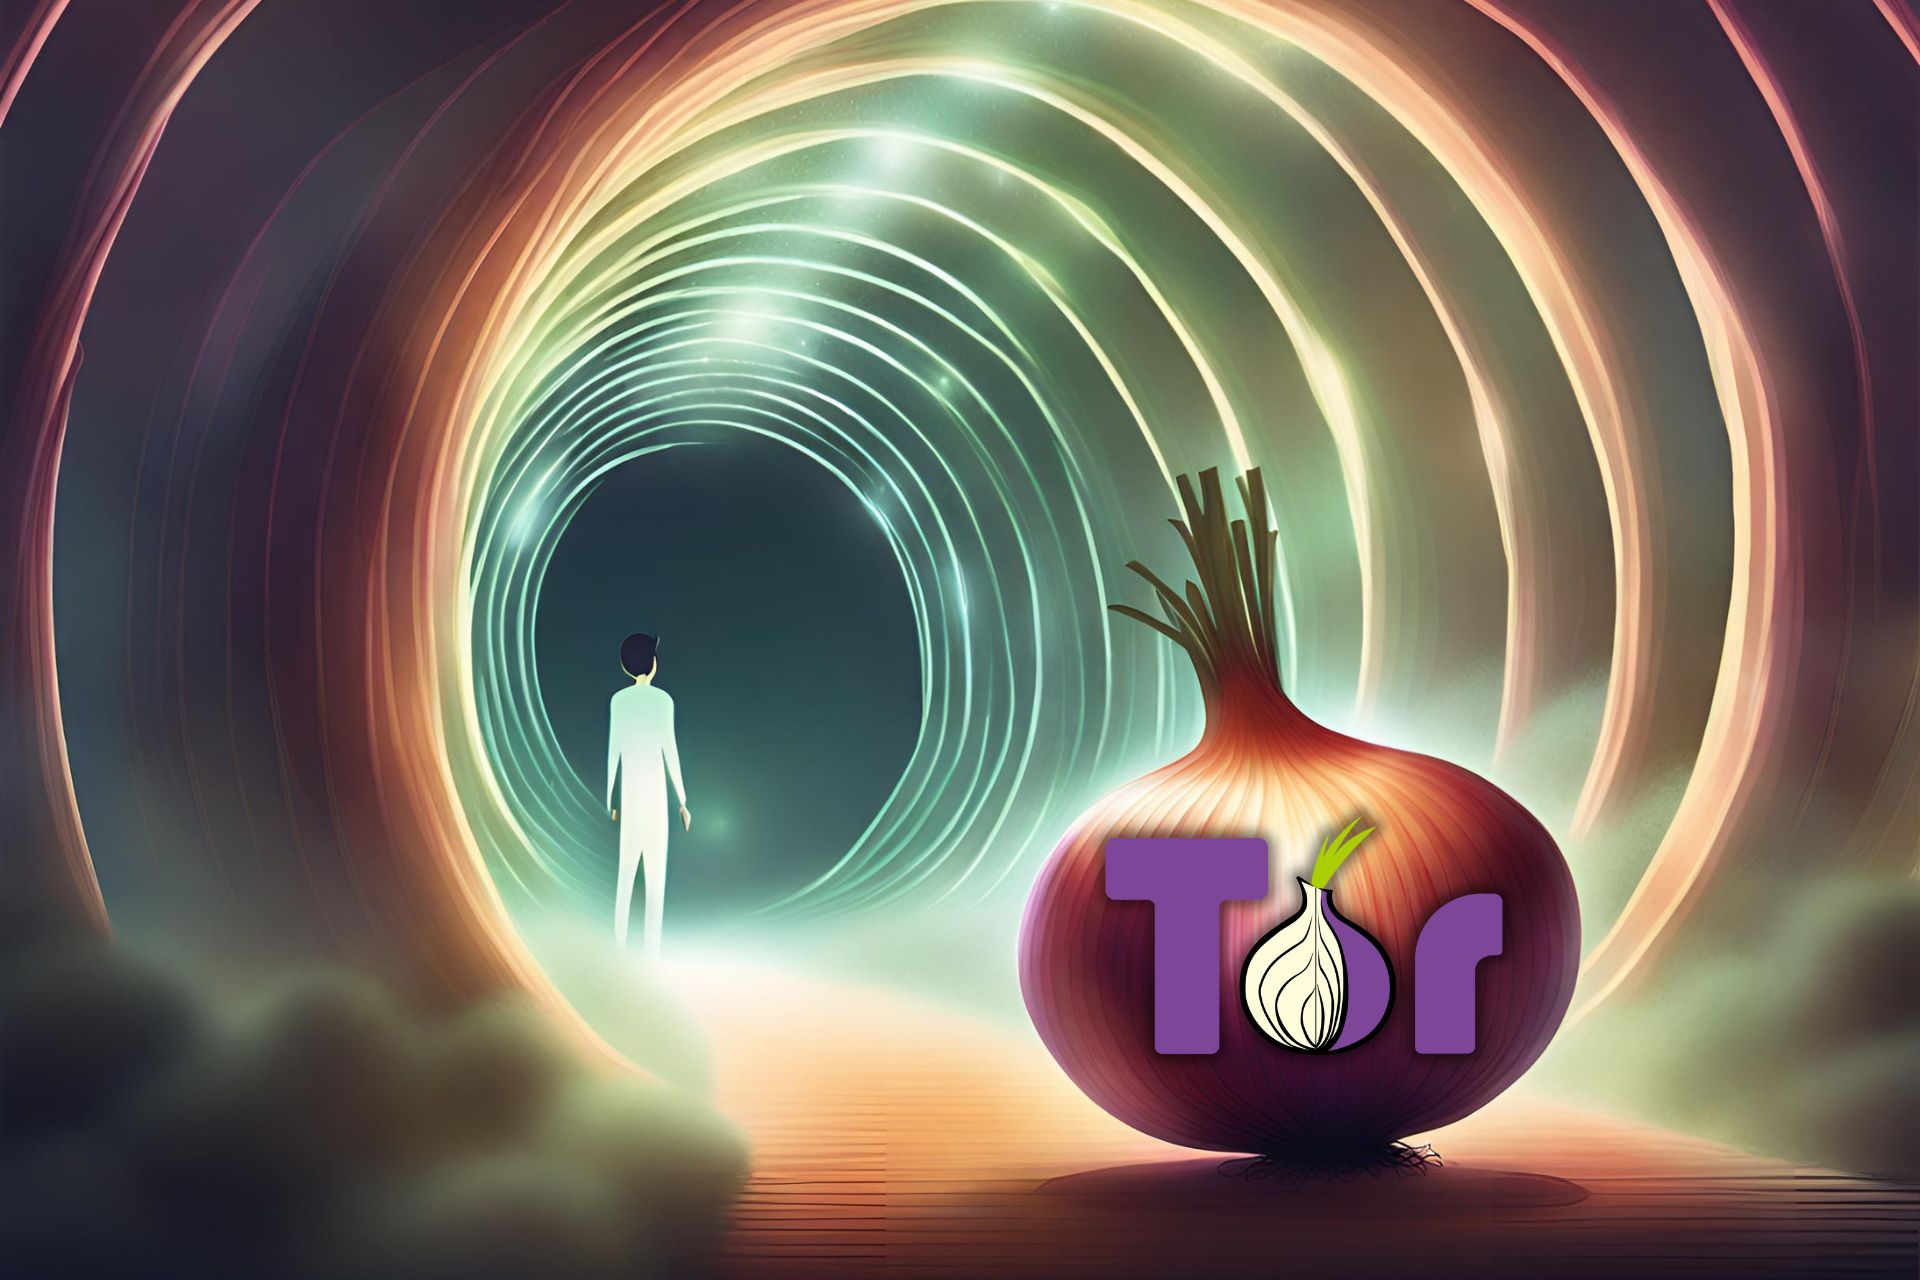 Tor browser added the WebTunnel feature to avoid Government censorship